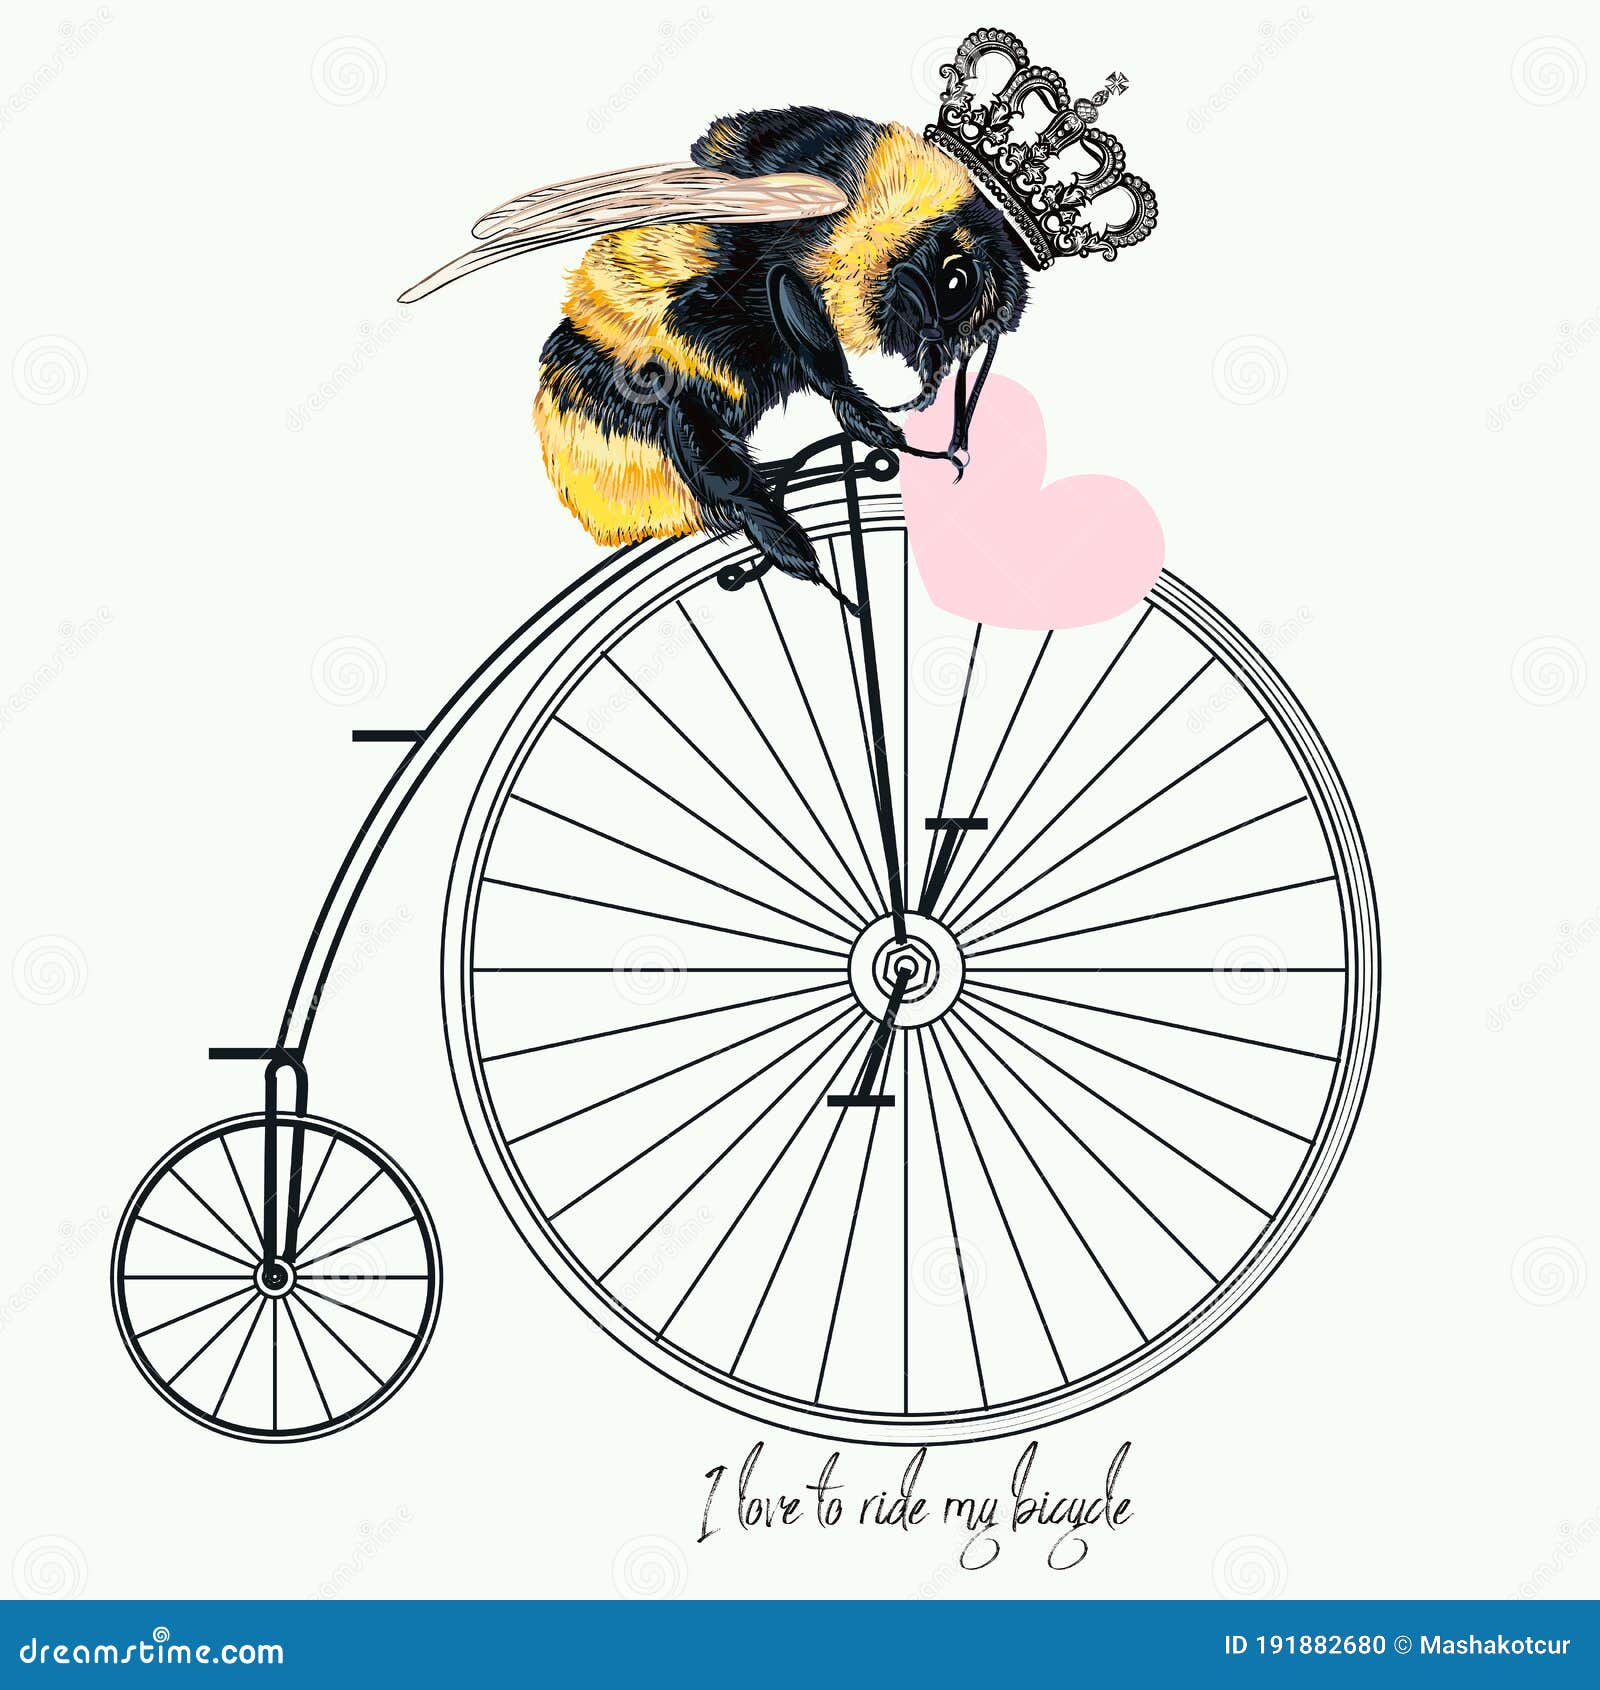 fashion apparel print bumble bee on bicycle with crown